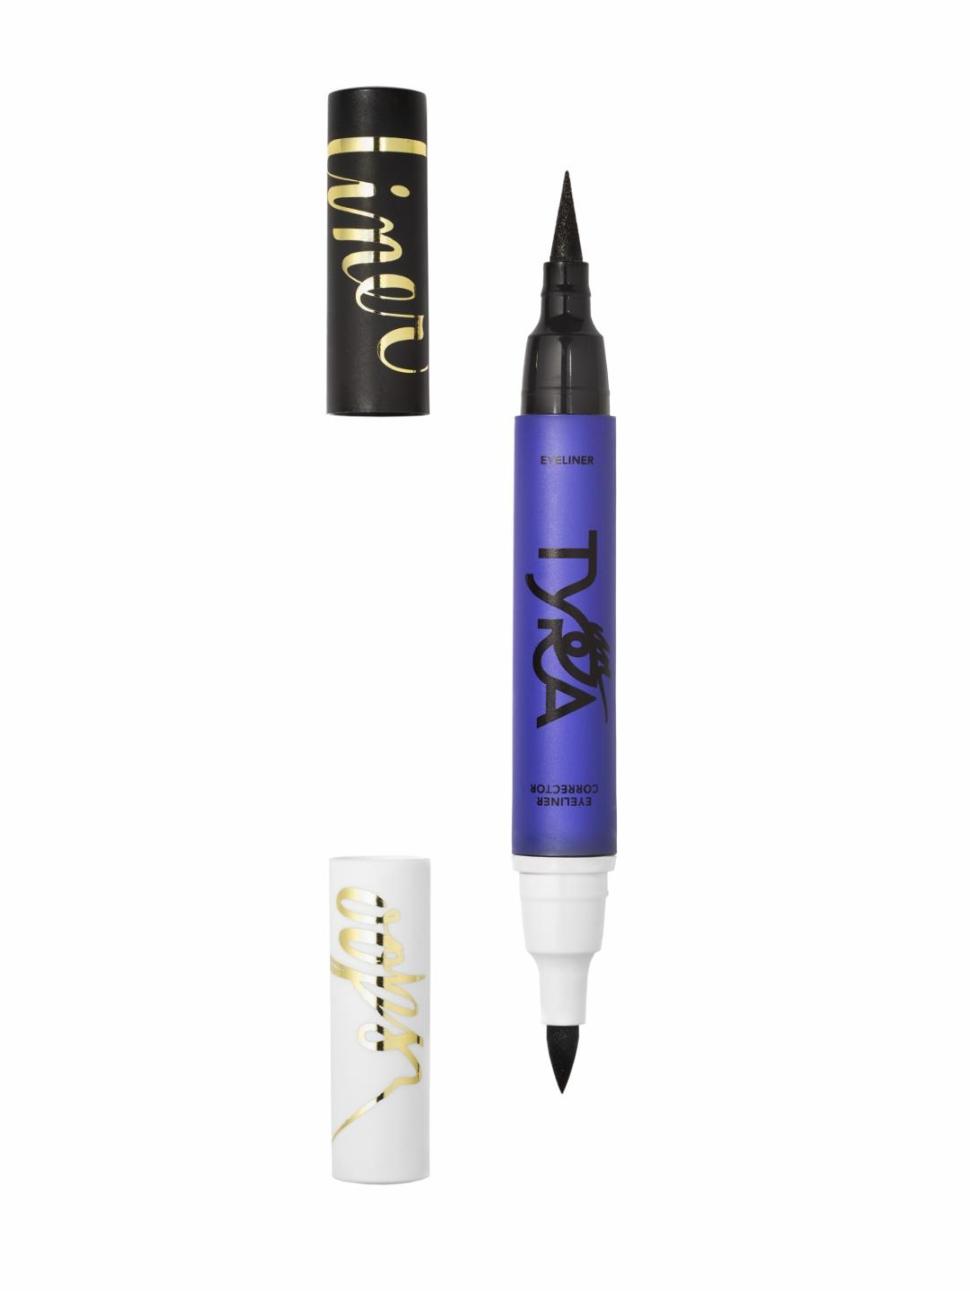 Oops Liner and Makeup Corrector, $    26